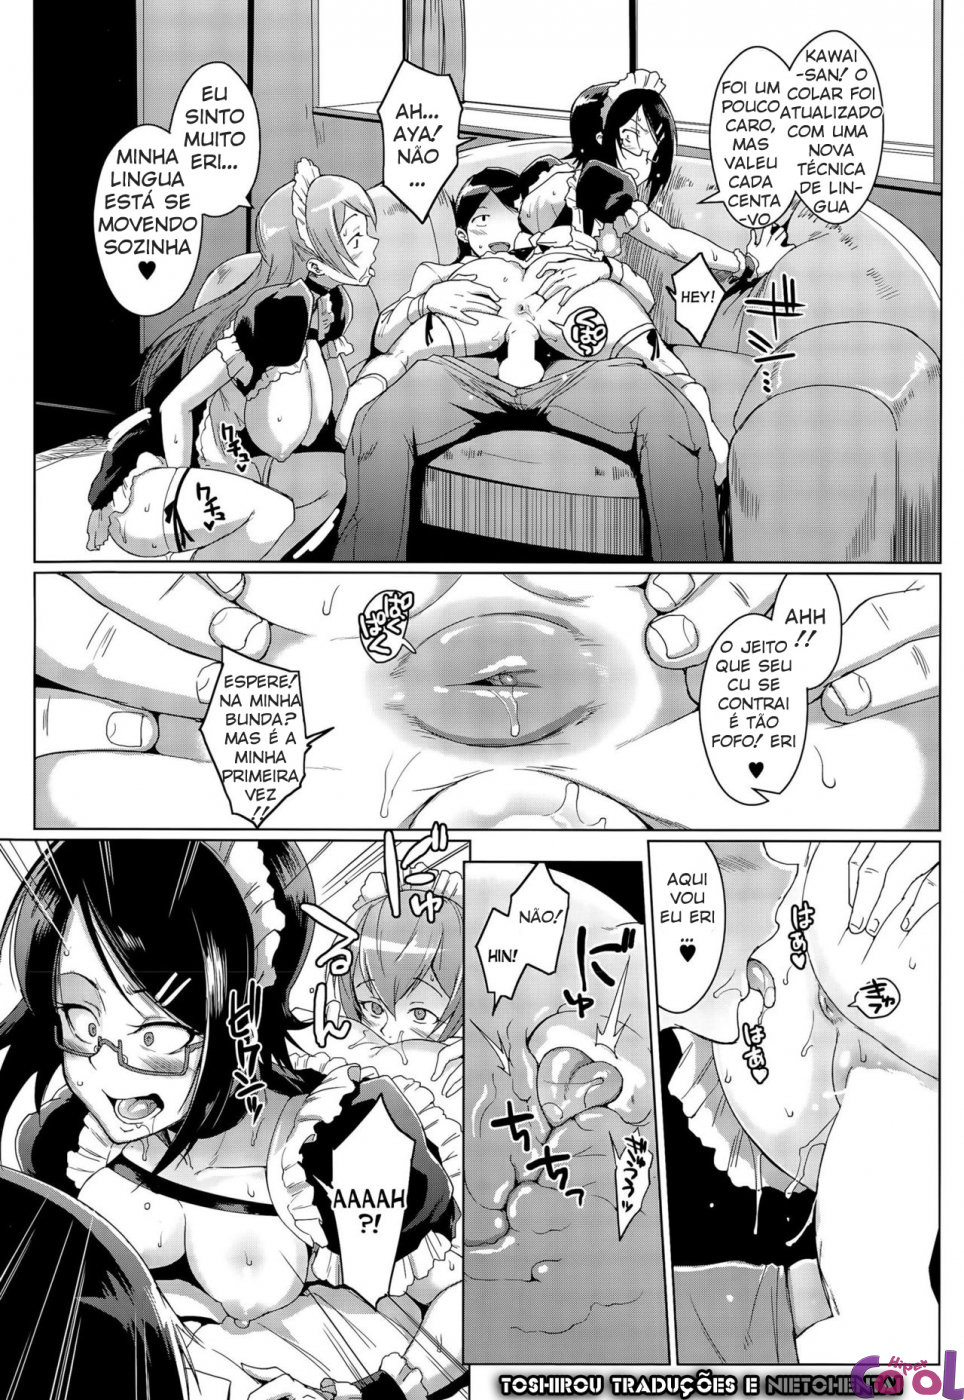 dolls-chapter-02-page-11.jpg